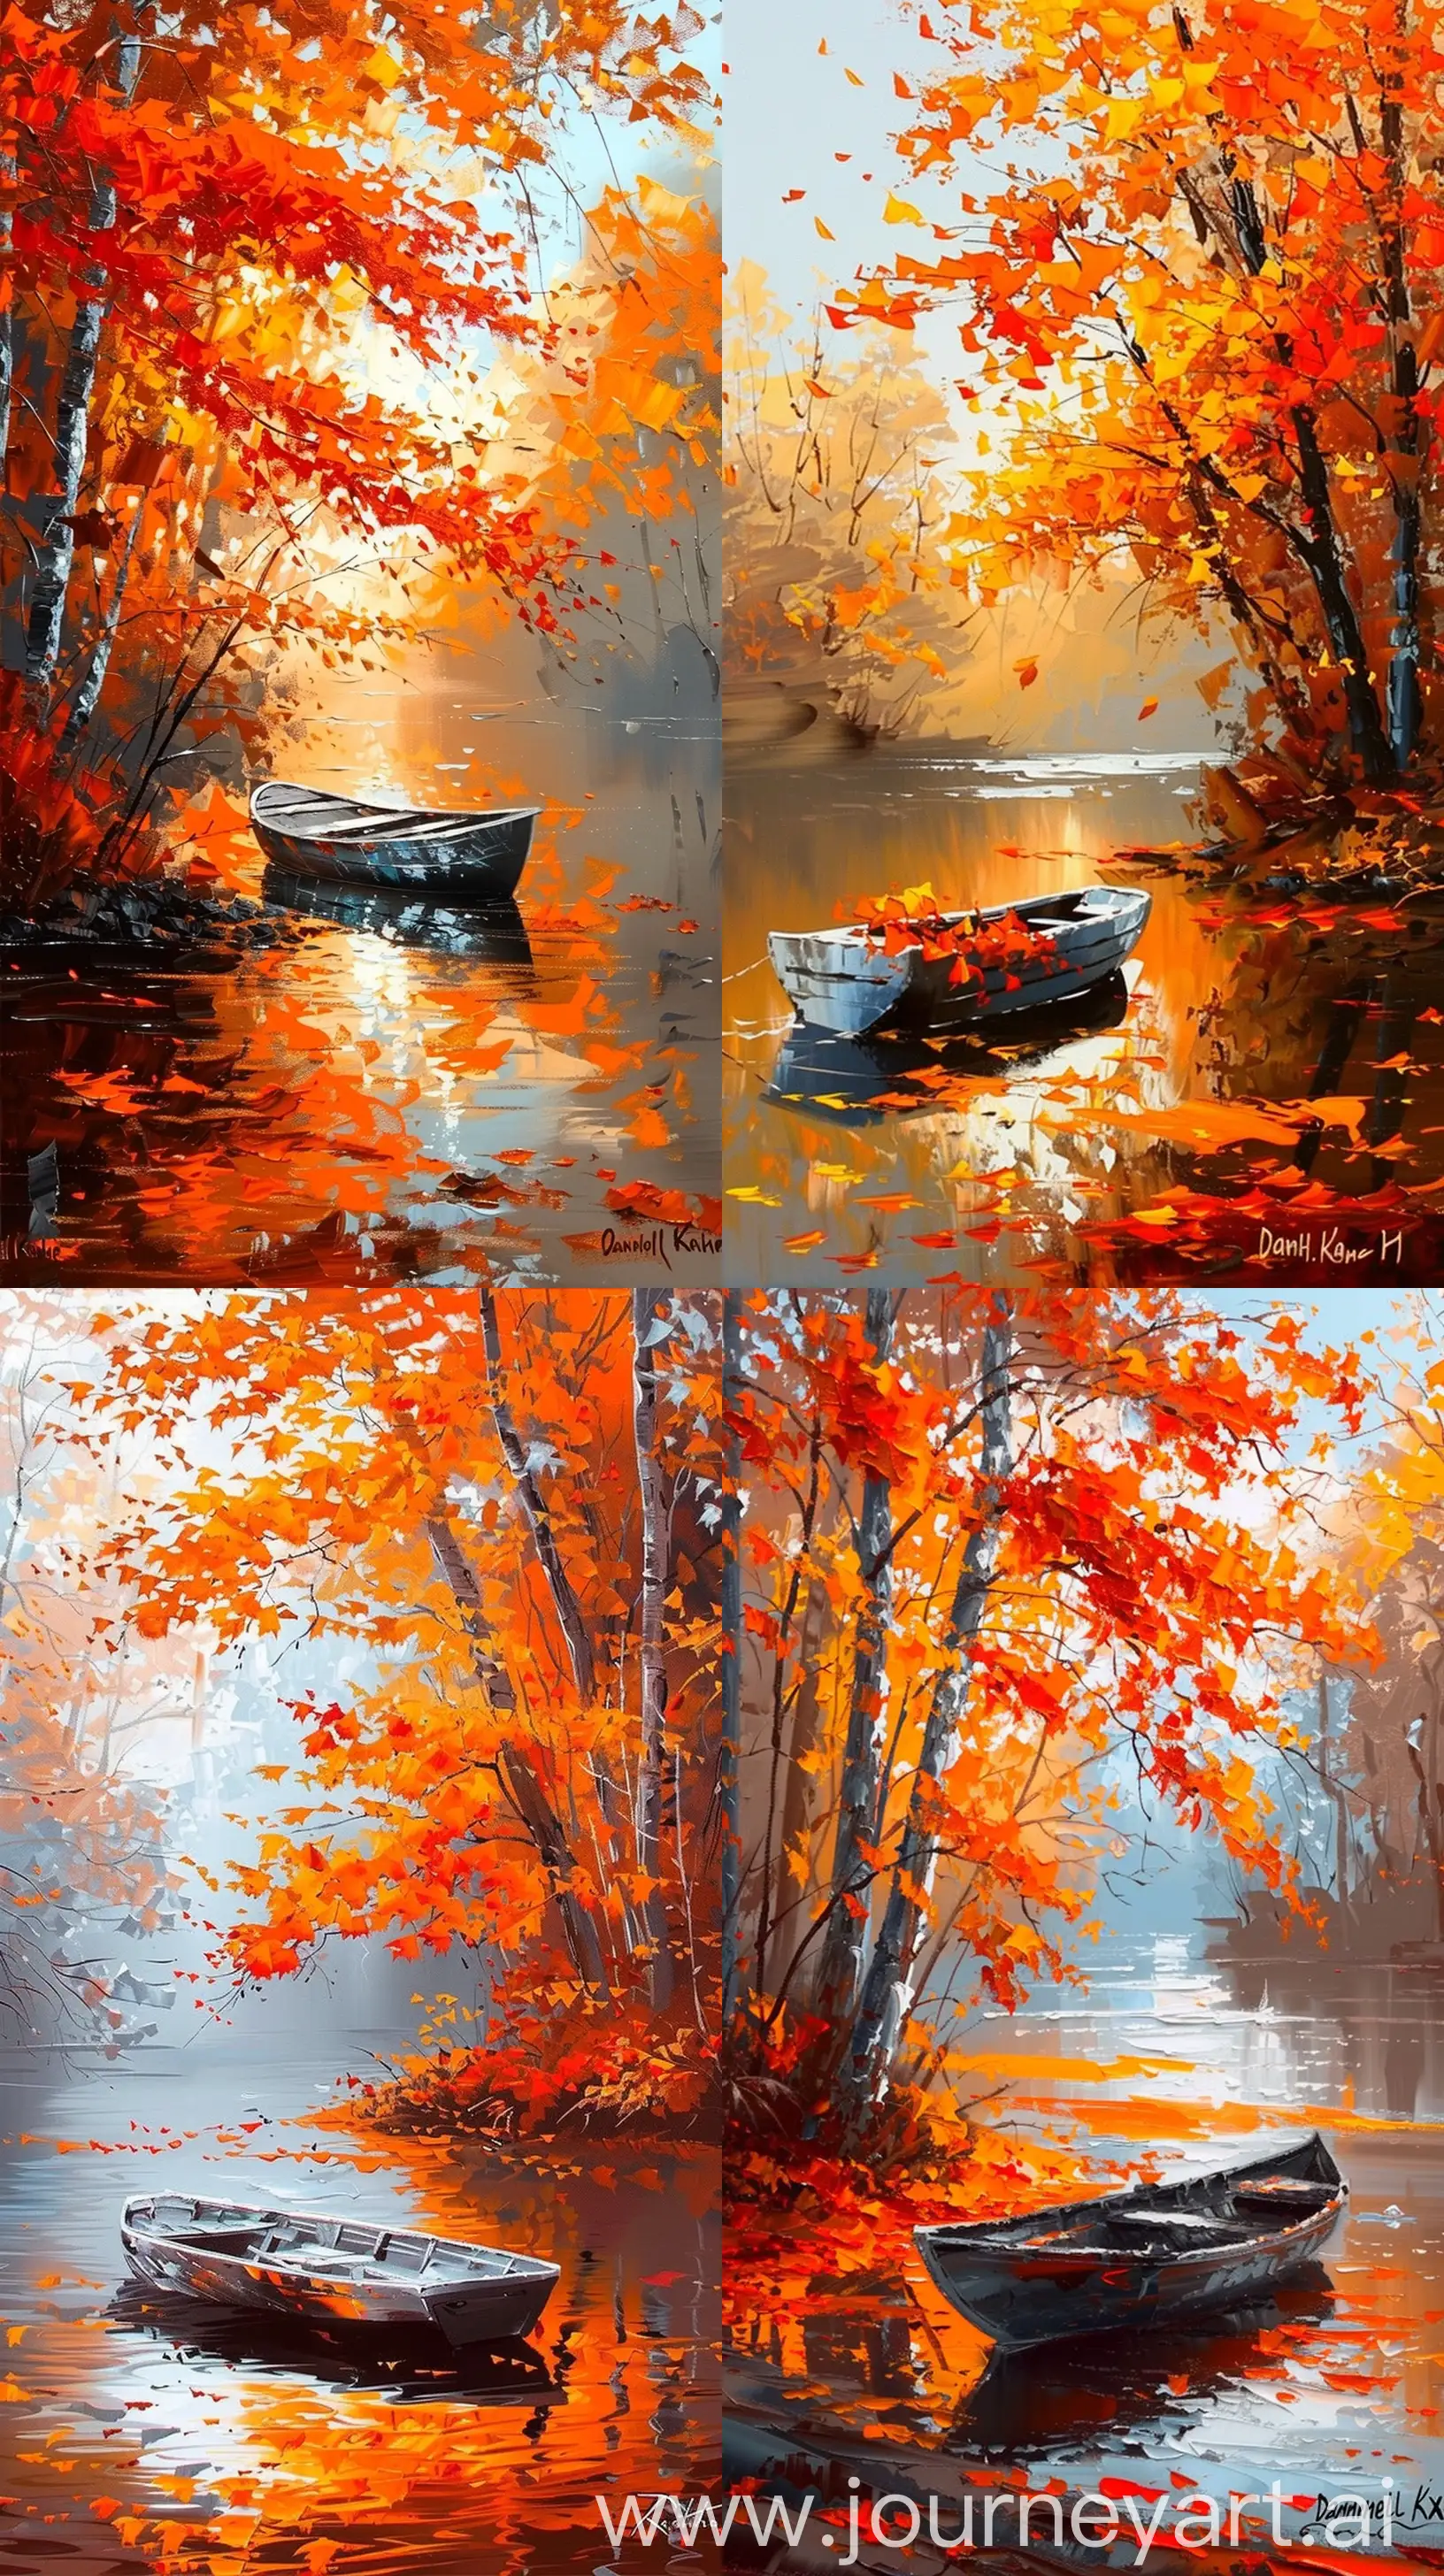 Romantic-Red-Maple-Forest-Landscape-Painting-with-Boat-by-Daniel-Kahne